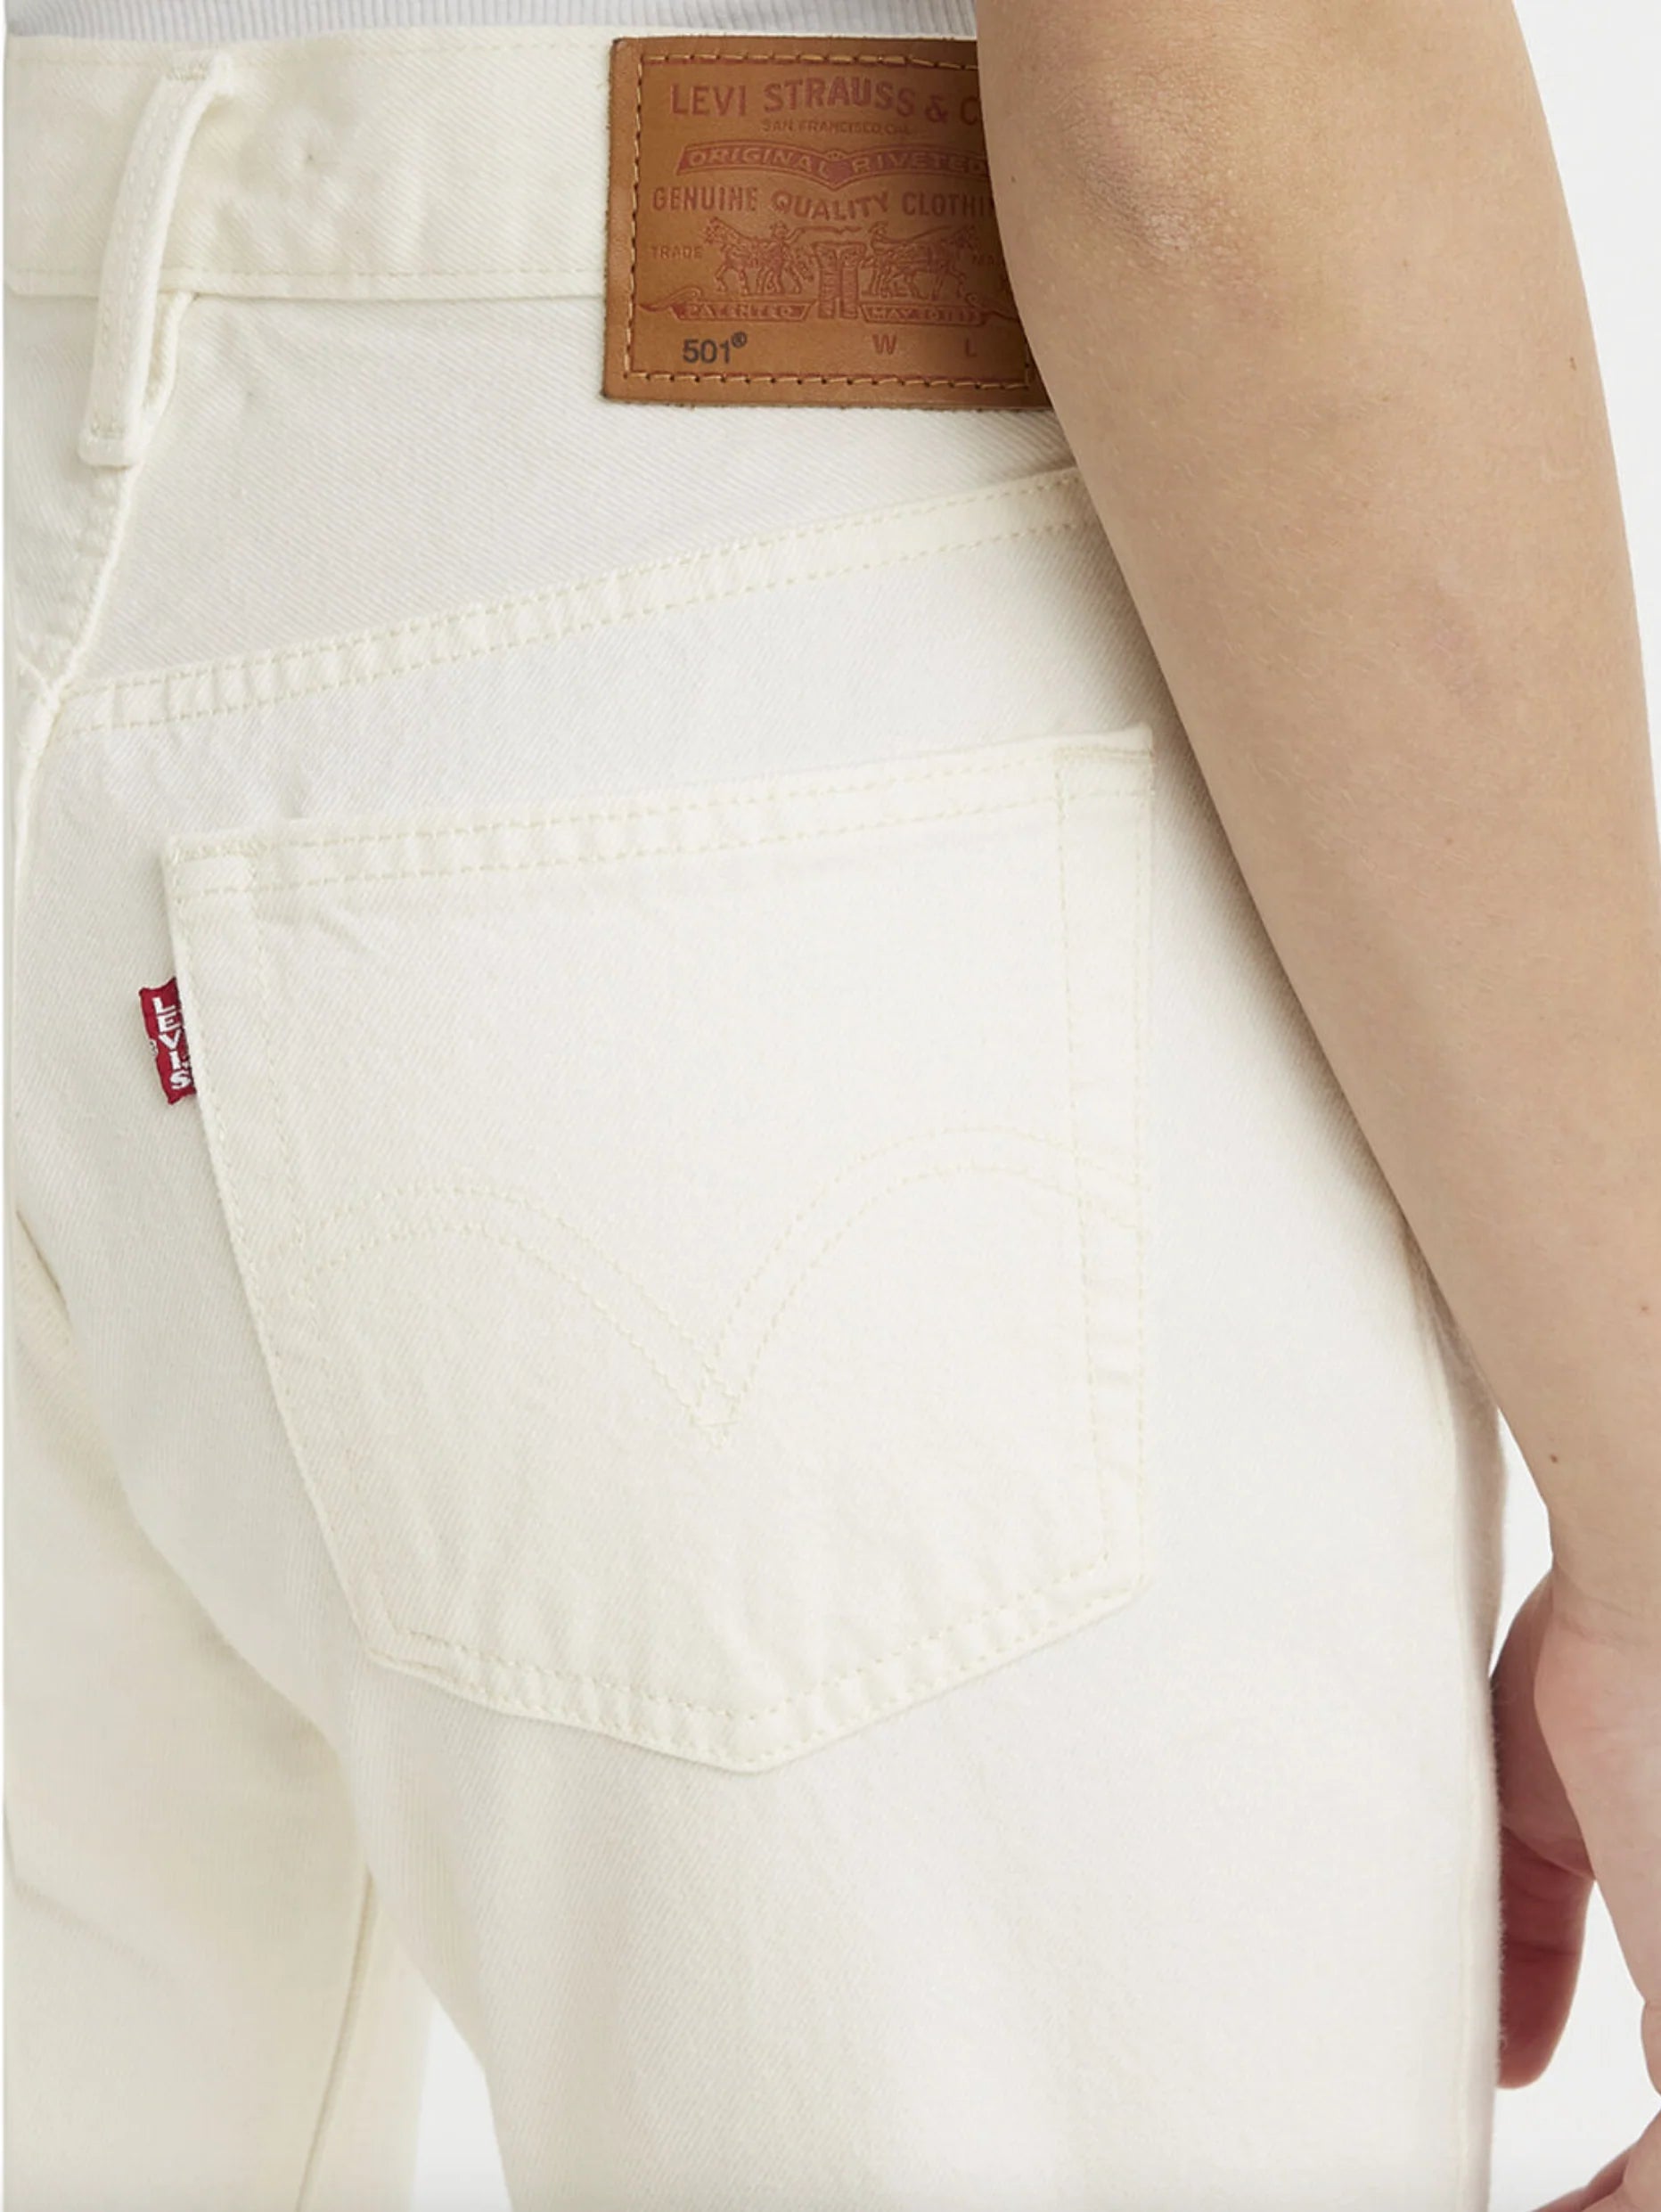 Levis 501 Jeans for the Women Yatch Time